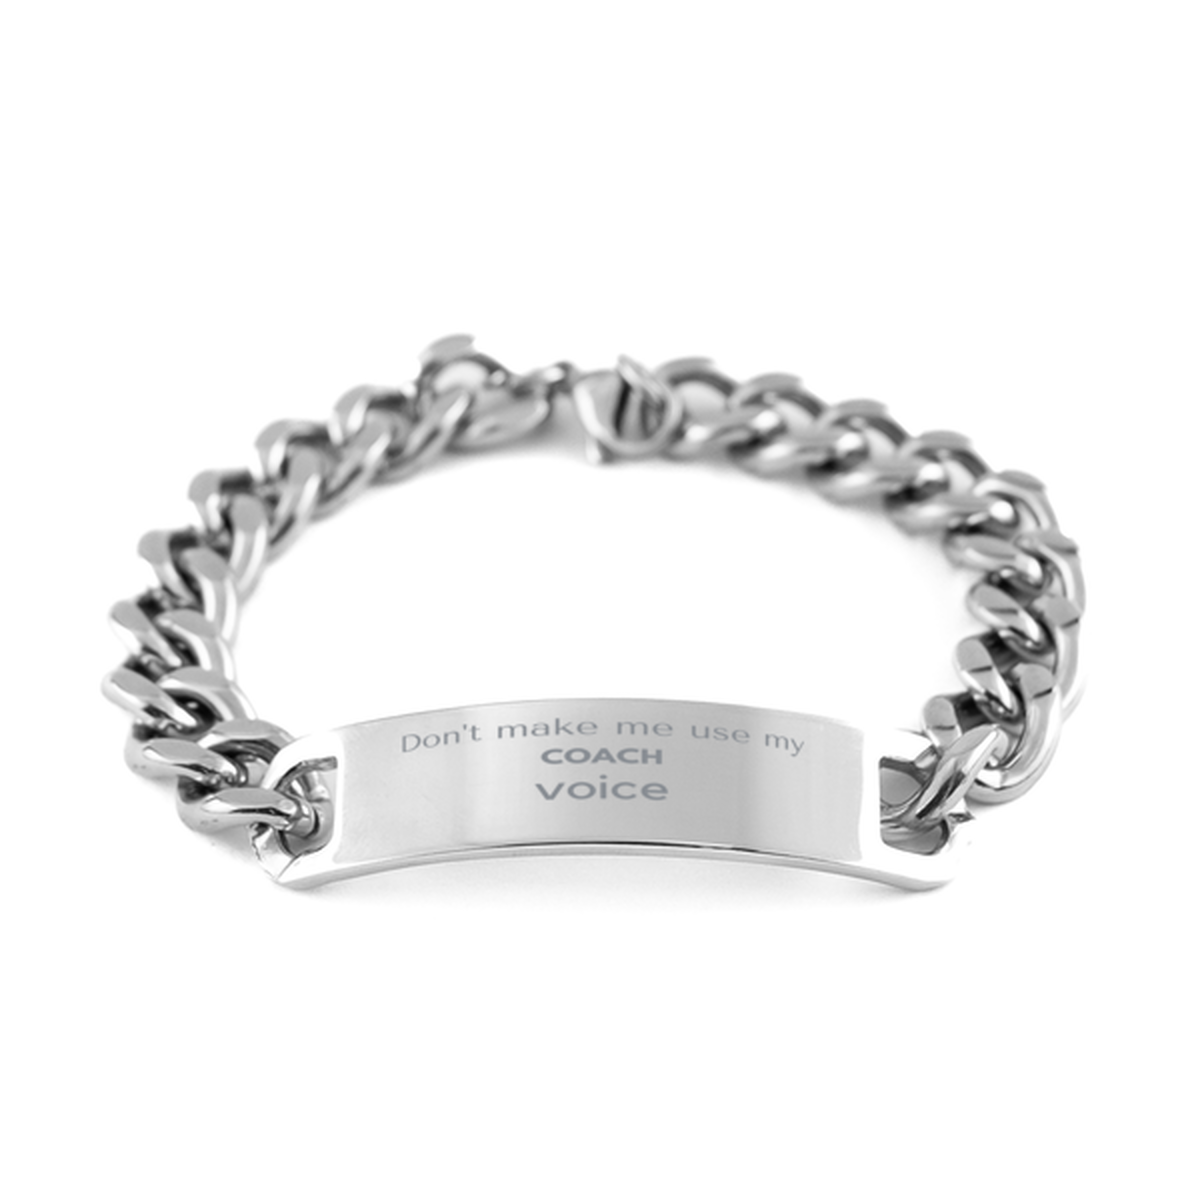 Don't make me use my Coach voice, Sarcasm Coach Gifts, Christmas Coach Cuban Chain Stainless Steel Bracelet Birthday Unique Gifts For Coach Coworkers, Men, Women, Colleague, Friends